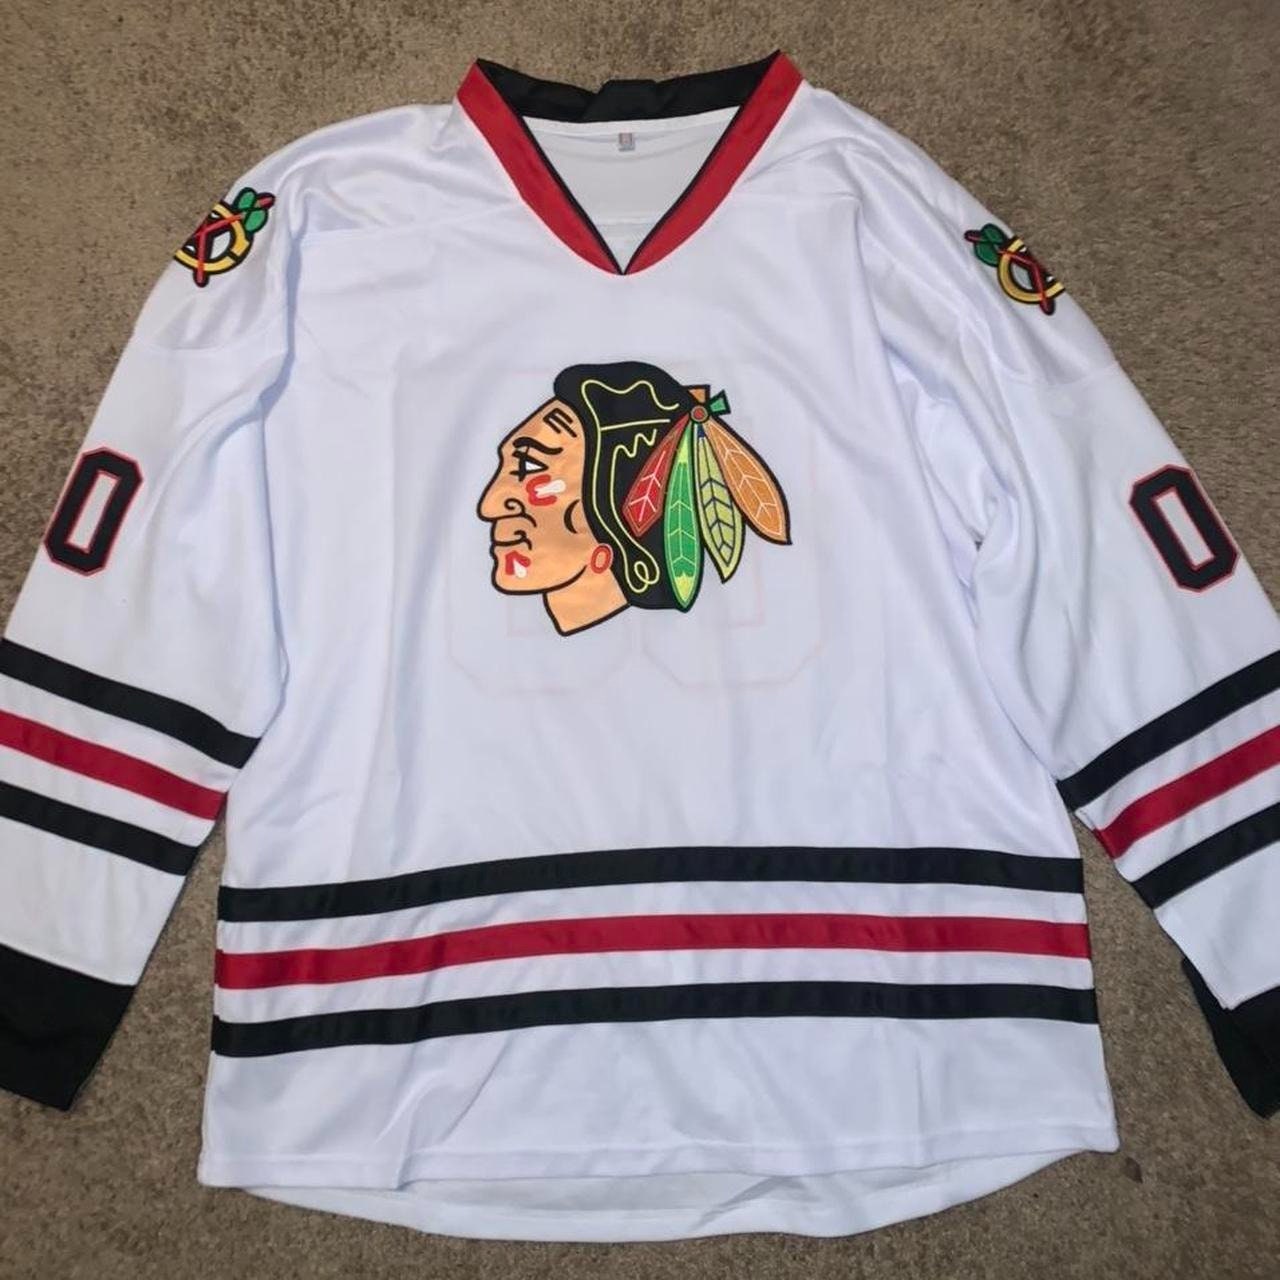 to Die for Collectibles National Lampoon’s Christmas Vacation Clark Griswold Chicago Blackhawks Jersey, White #00, Size XL, New